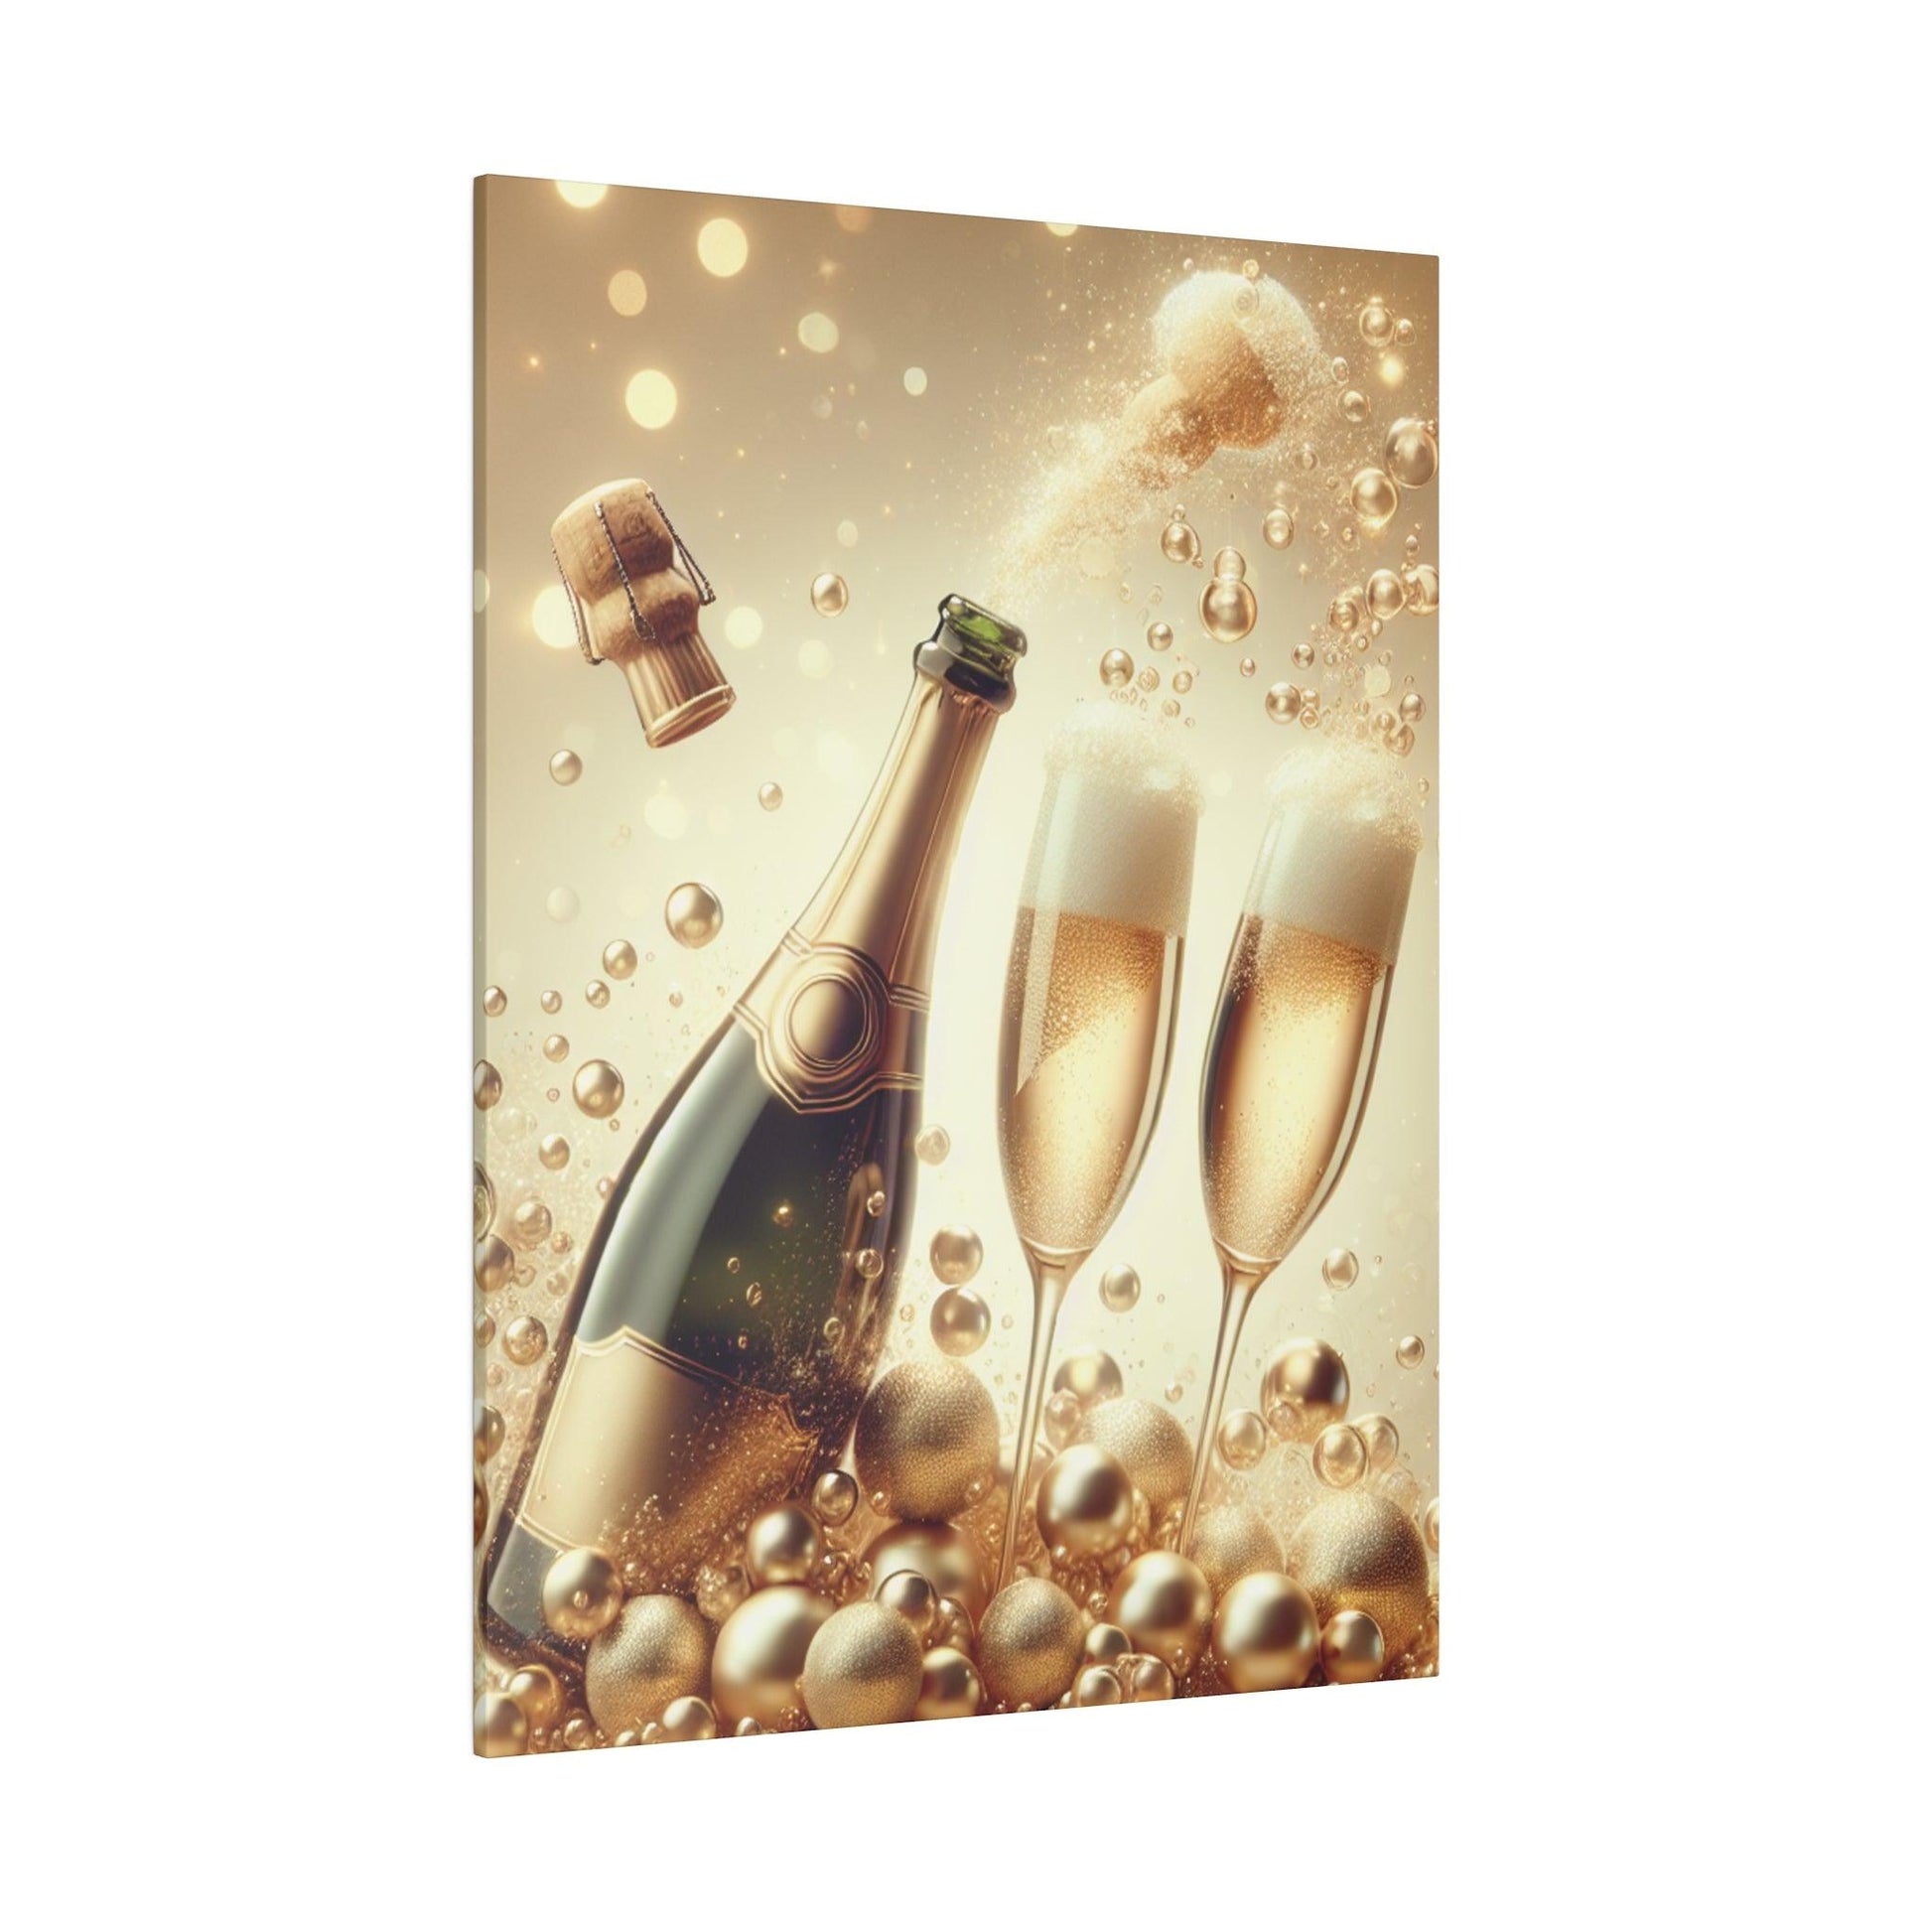 "Champagne Reverie: An Euphoric Dance of Colors and Emotions" - The Alice Gallery